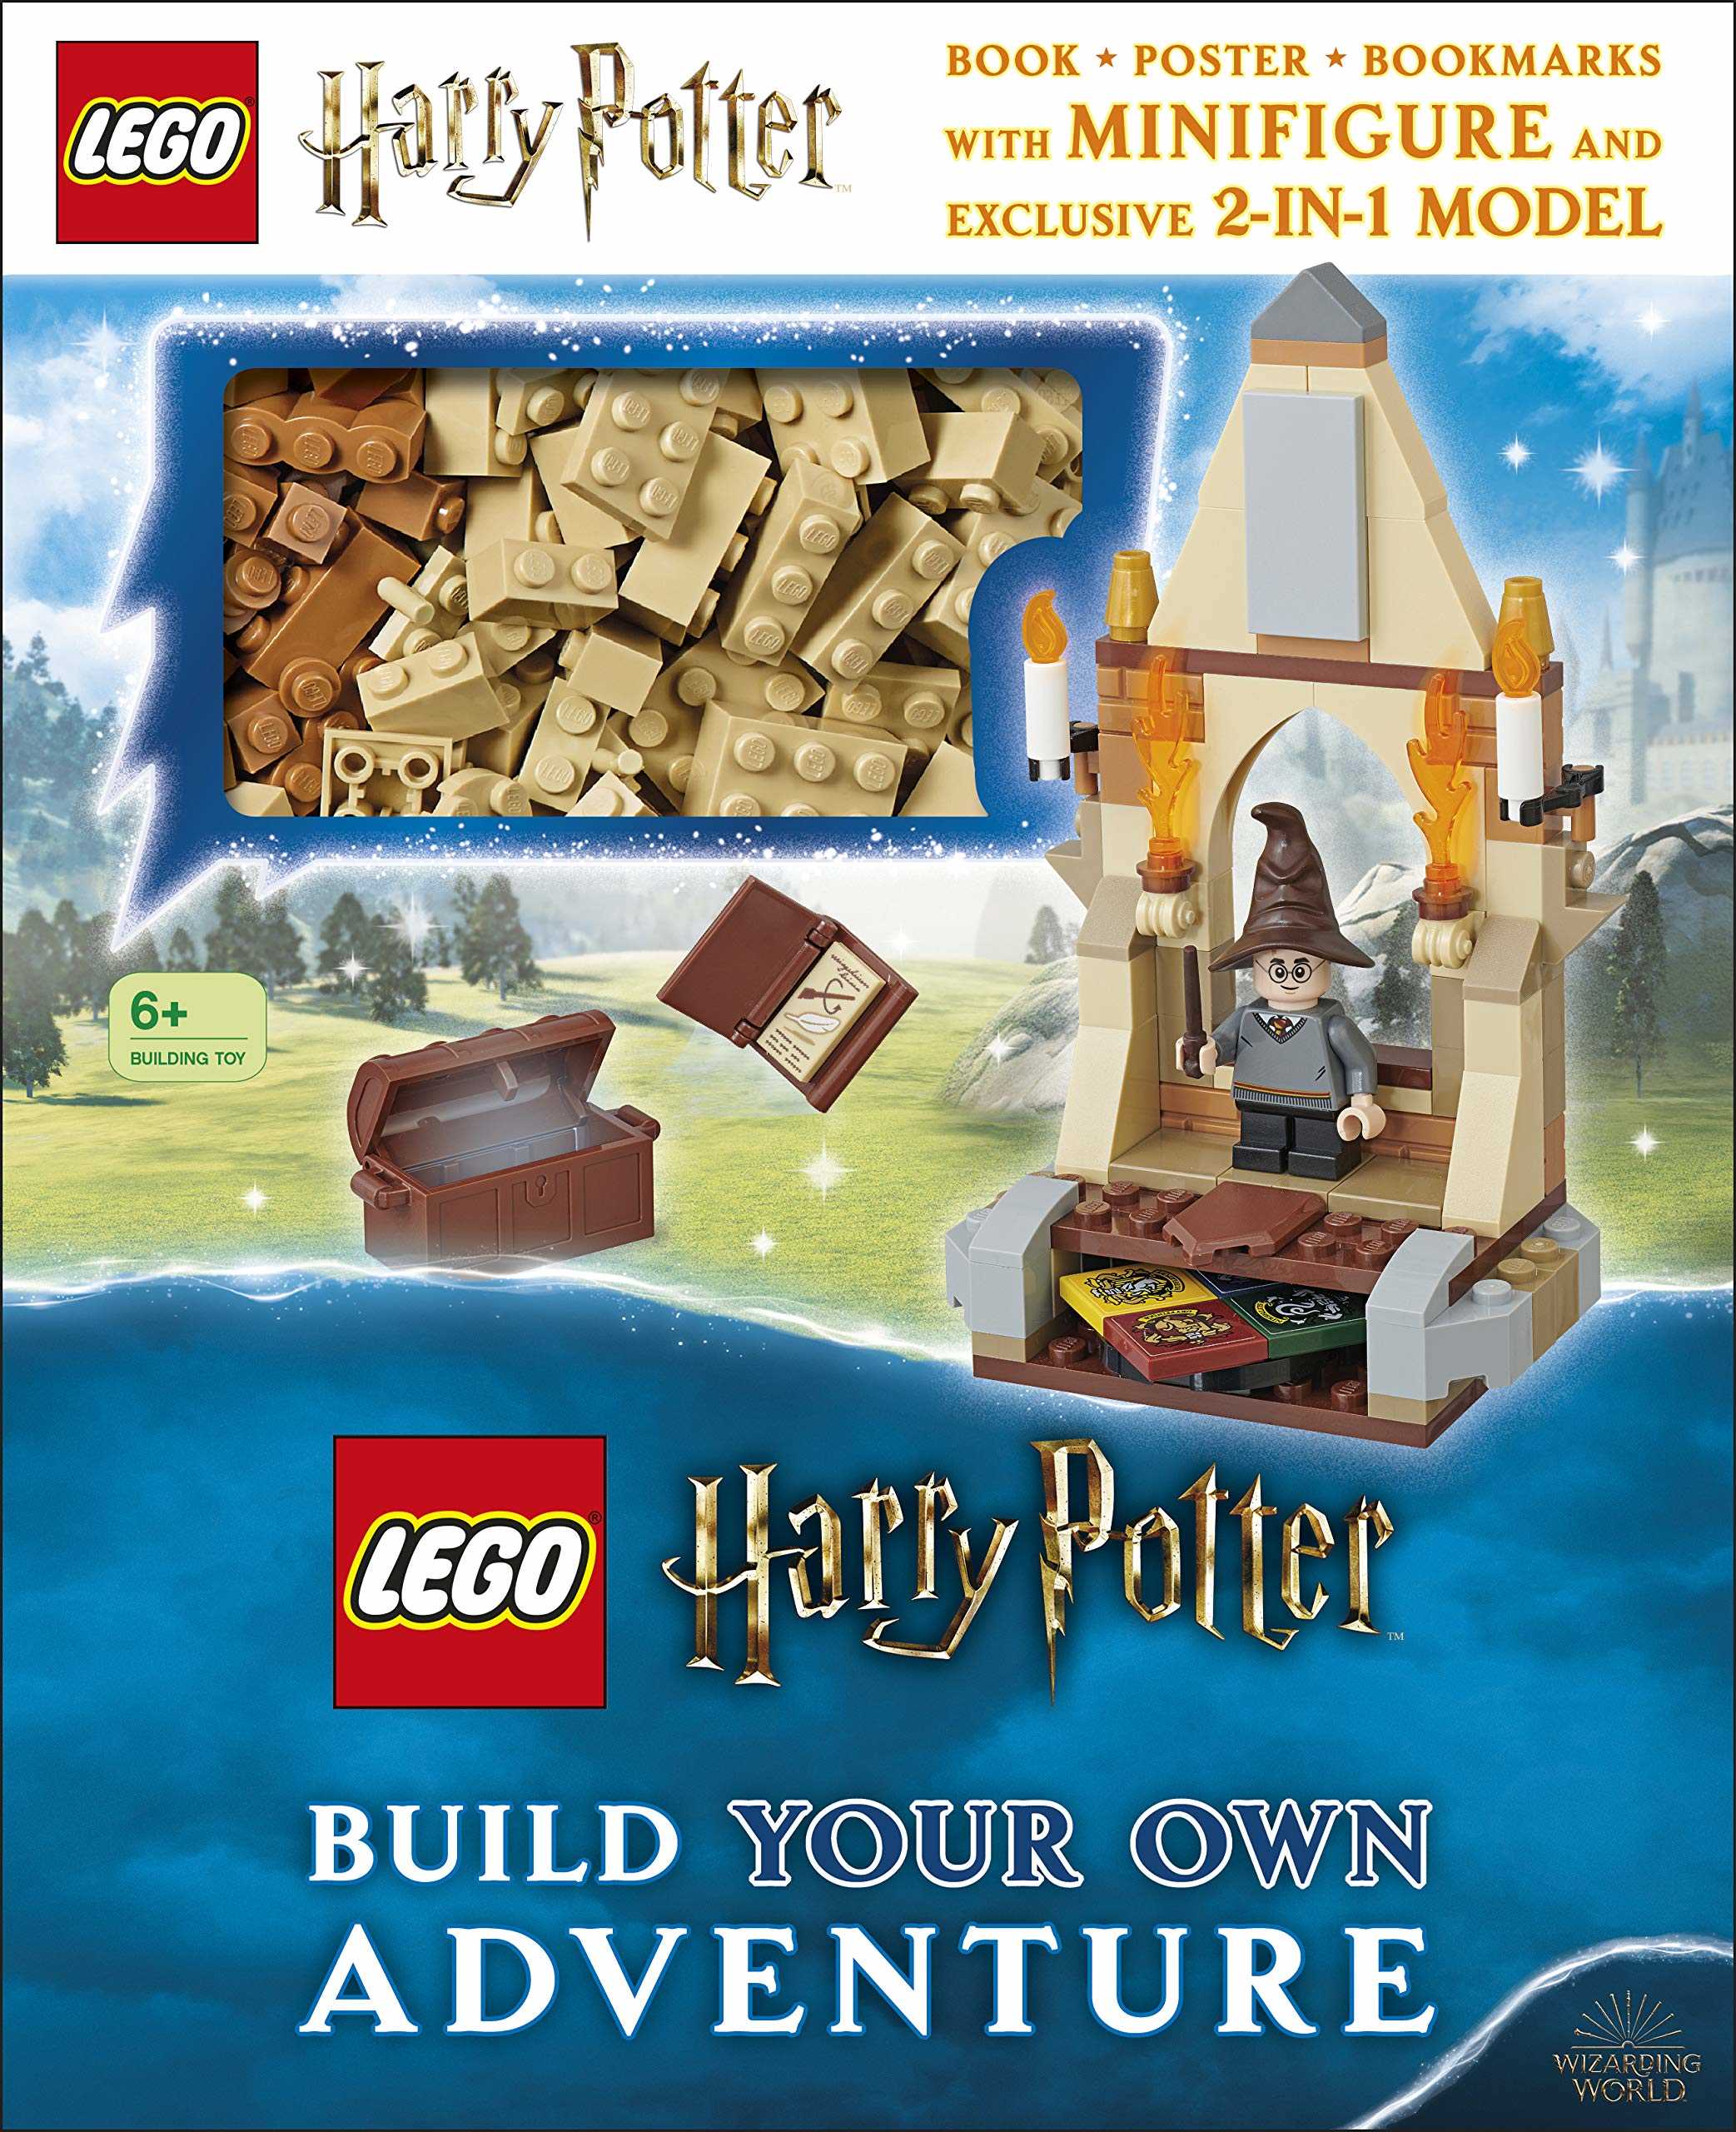 LEGO Harry Potter Build Your Own Adventure (with LEGO Harry Potter Minifigure and Exclusive Model)